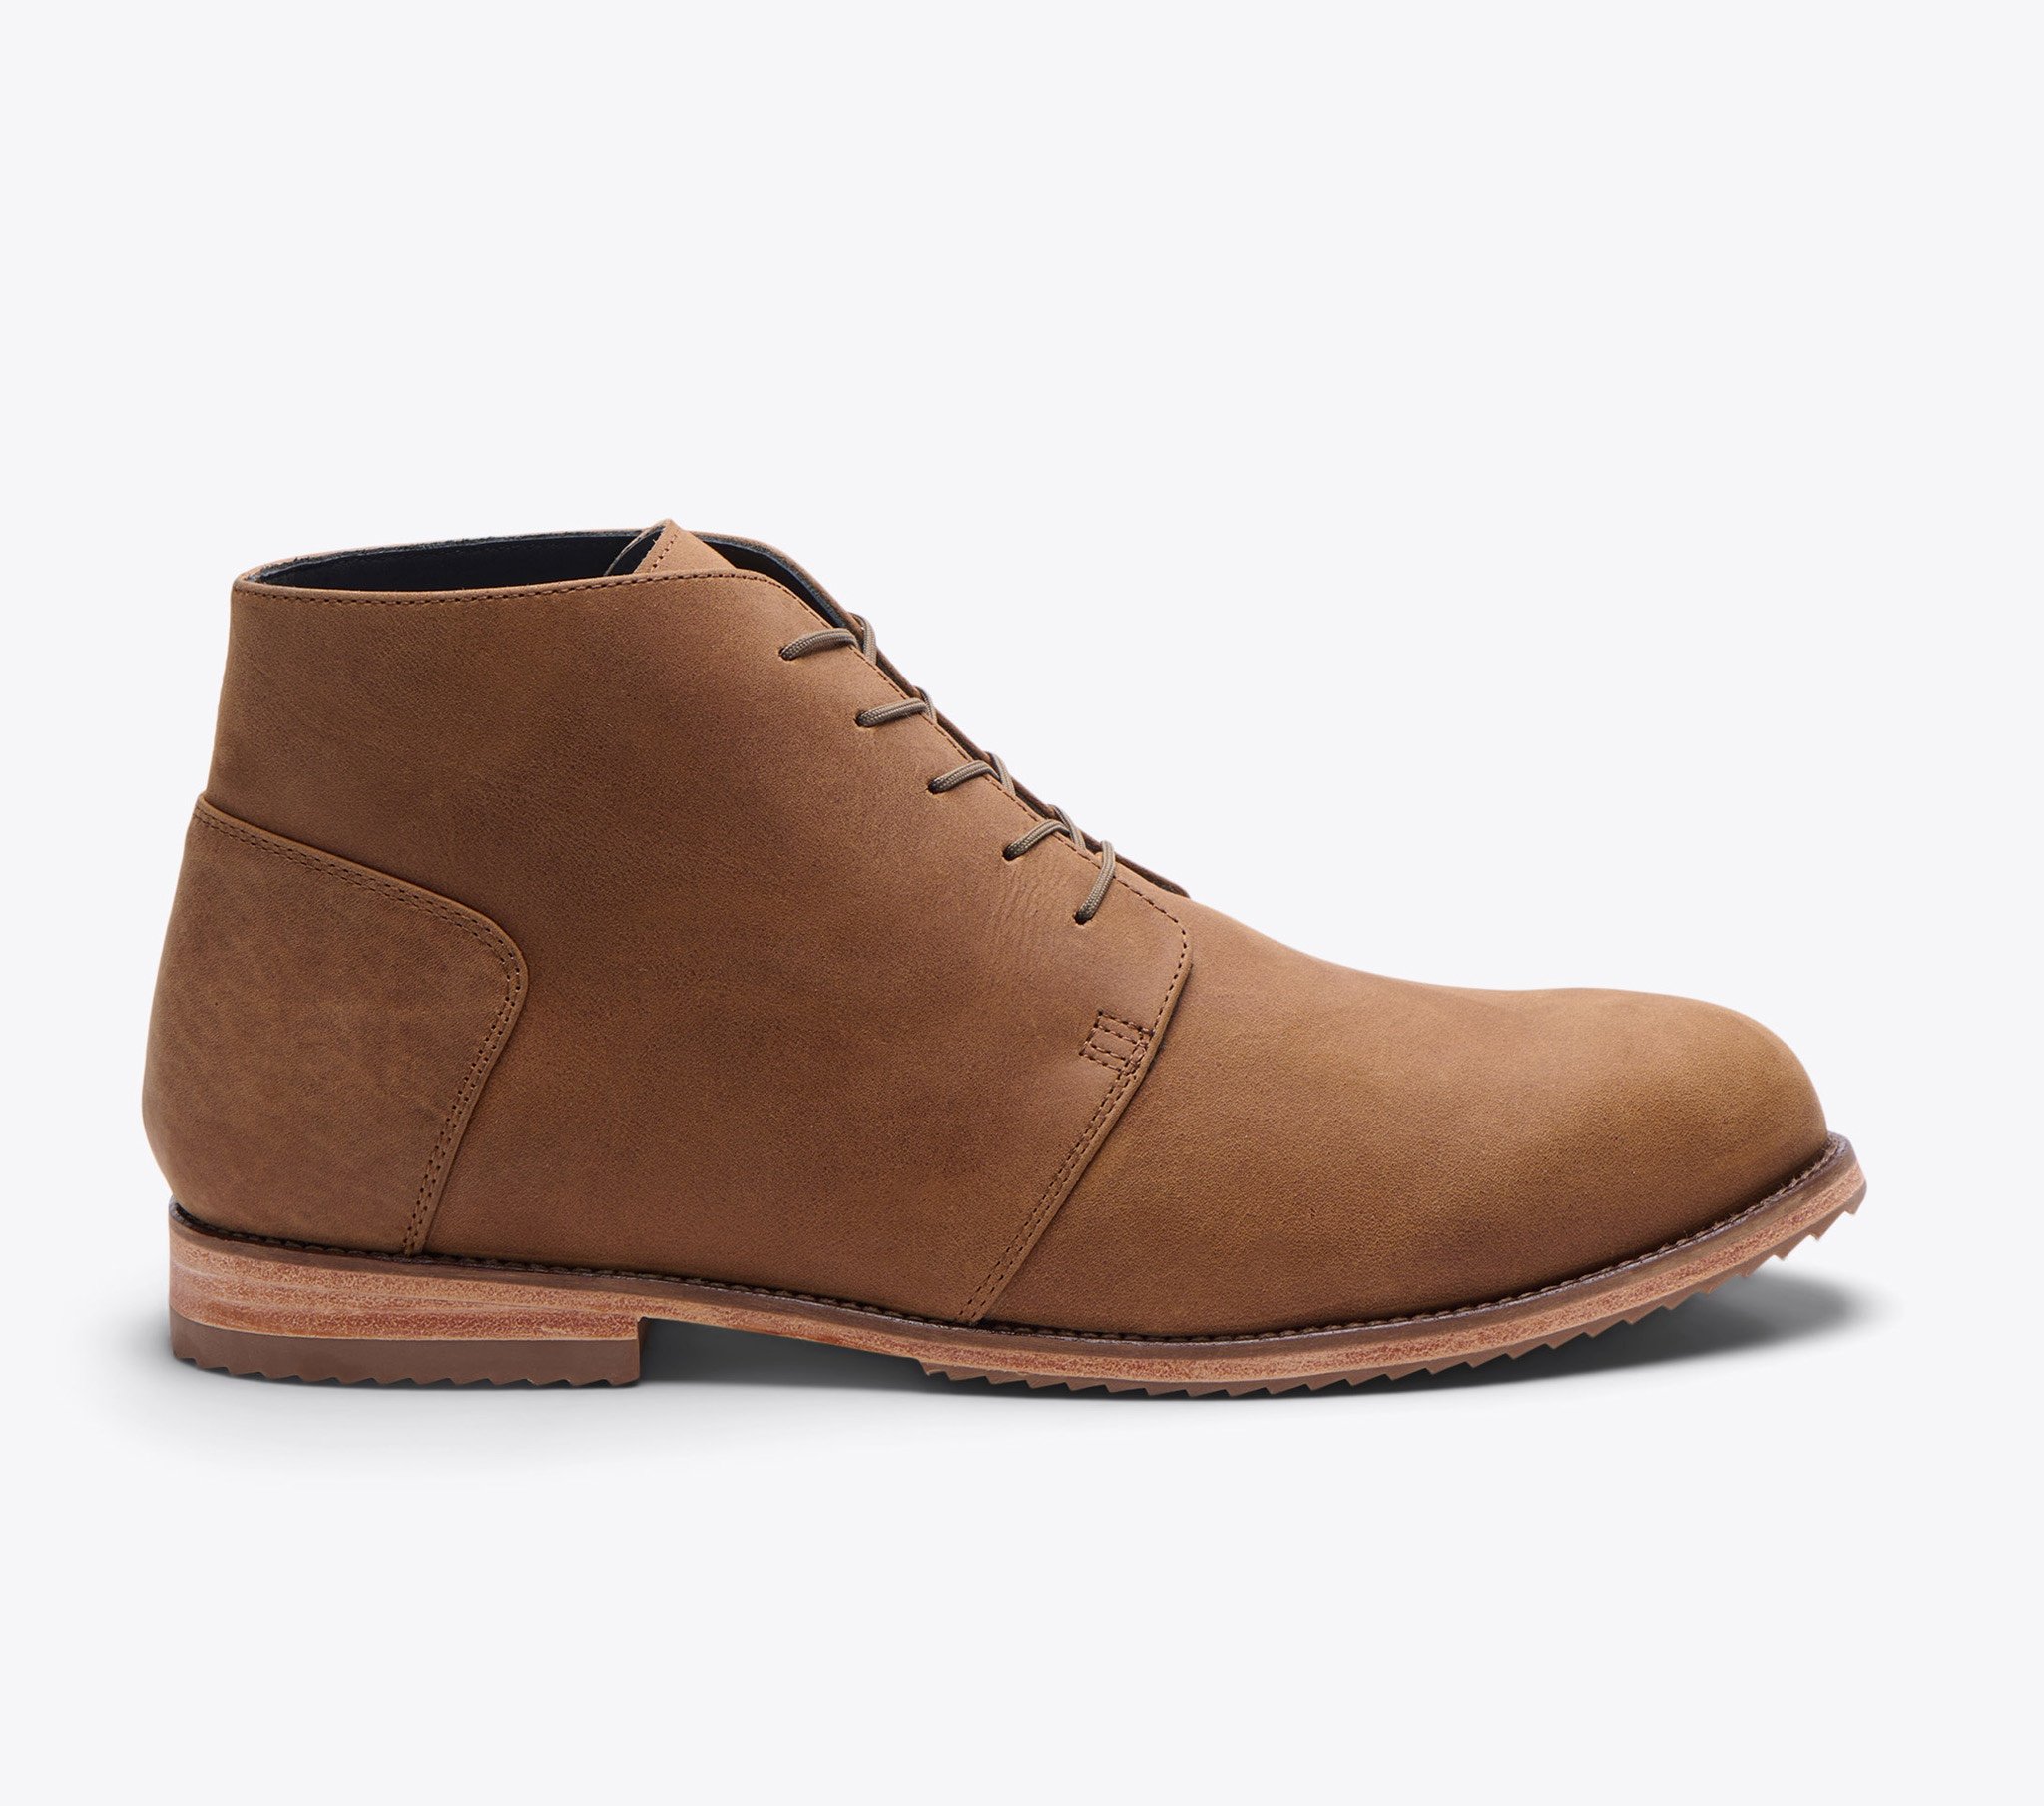 Nisolo Everyday Chukka Boot Tobacco - Every Nisolo product is built on the foundation of comfort, function, and design. 